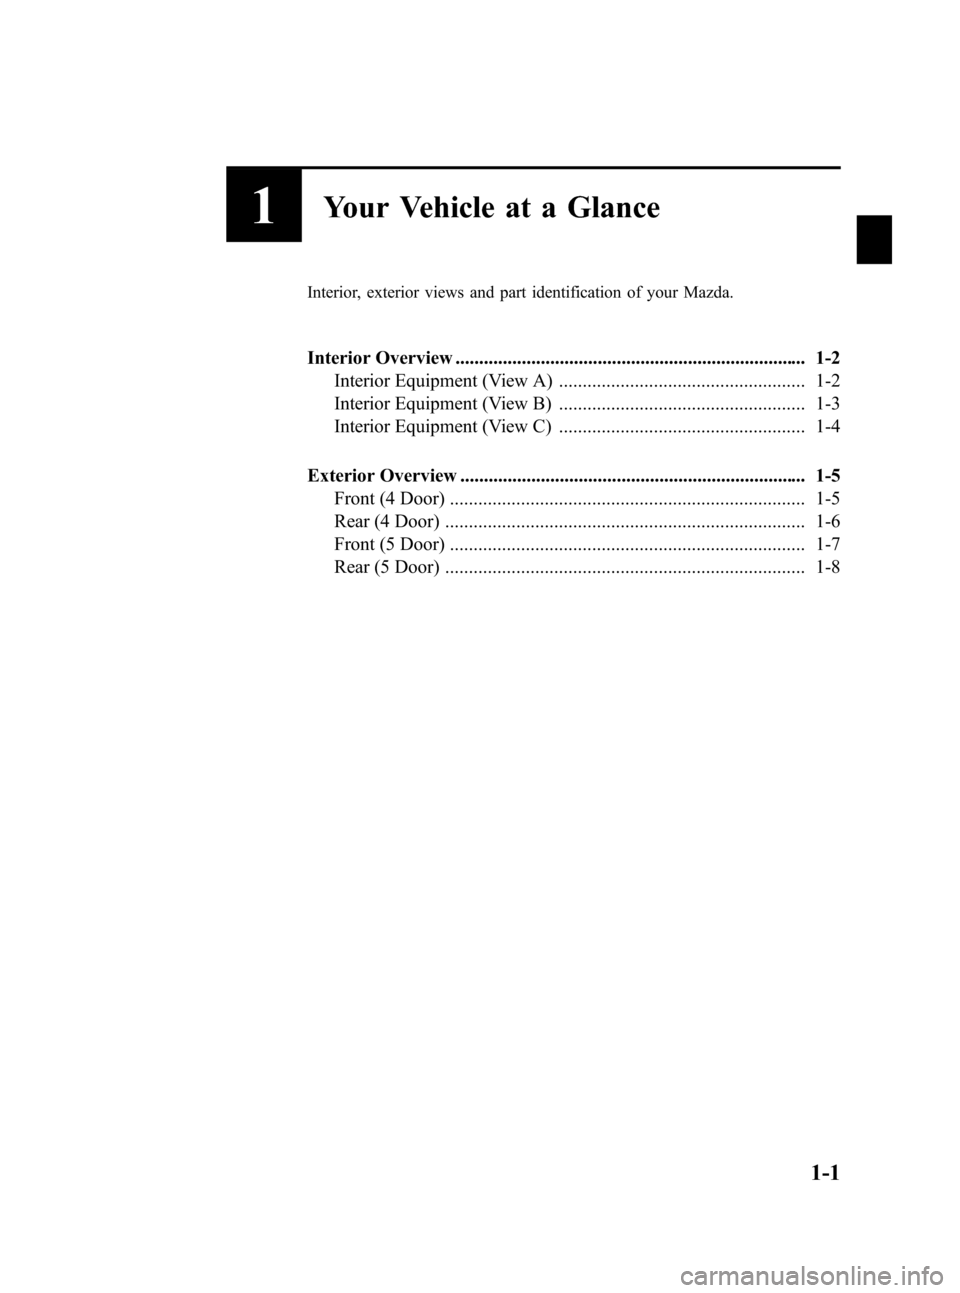 MAZDA MODEL 3 HATCHBACK 2010  Owners Manual (in English) Black plate (7,1)
1Your Vehicle at a Glance
Interior, exterior views and part identification of your Mazda.
Interior Overview ..........................................................................